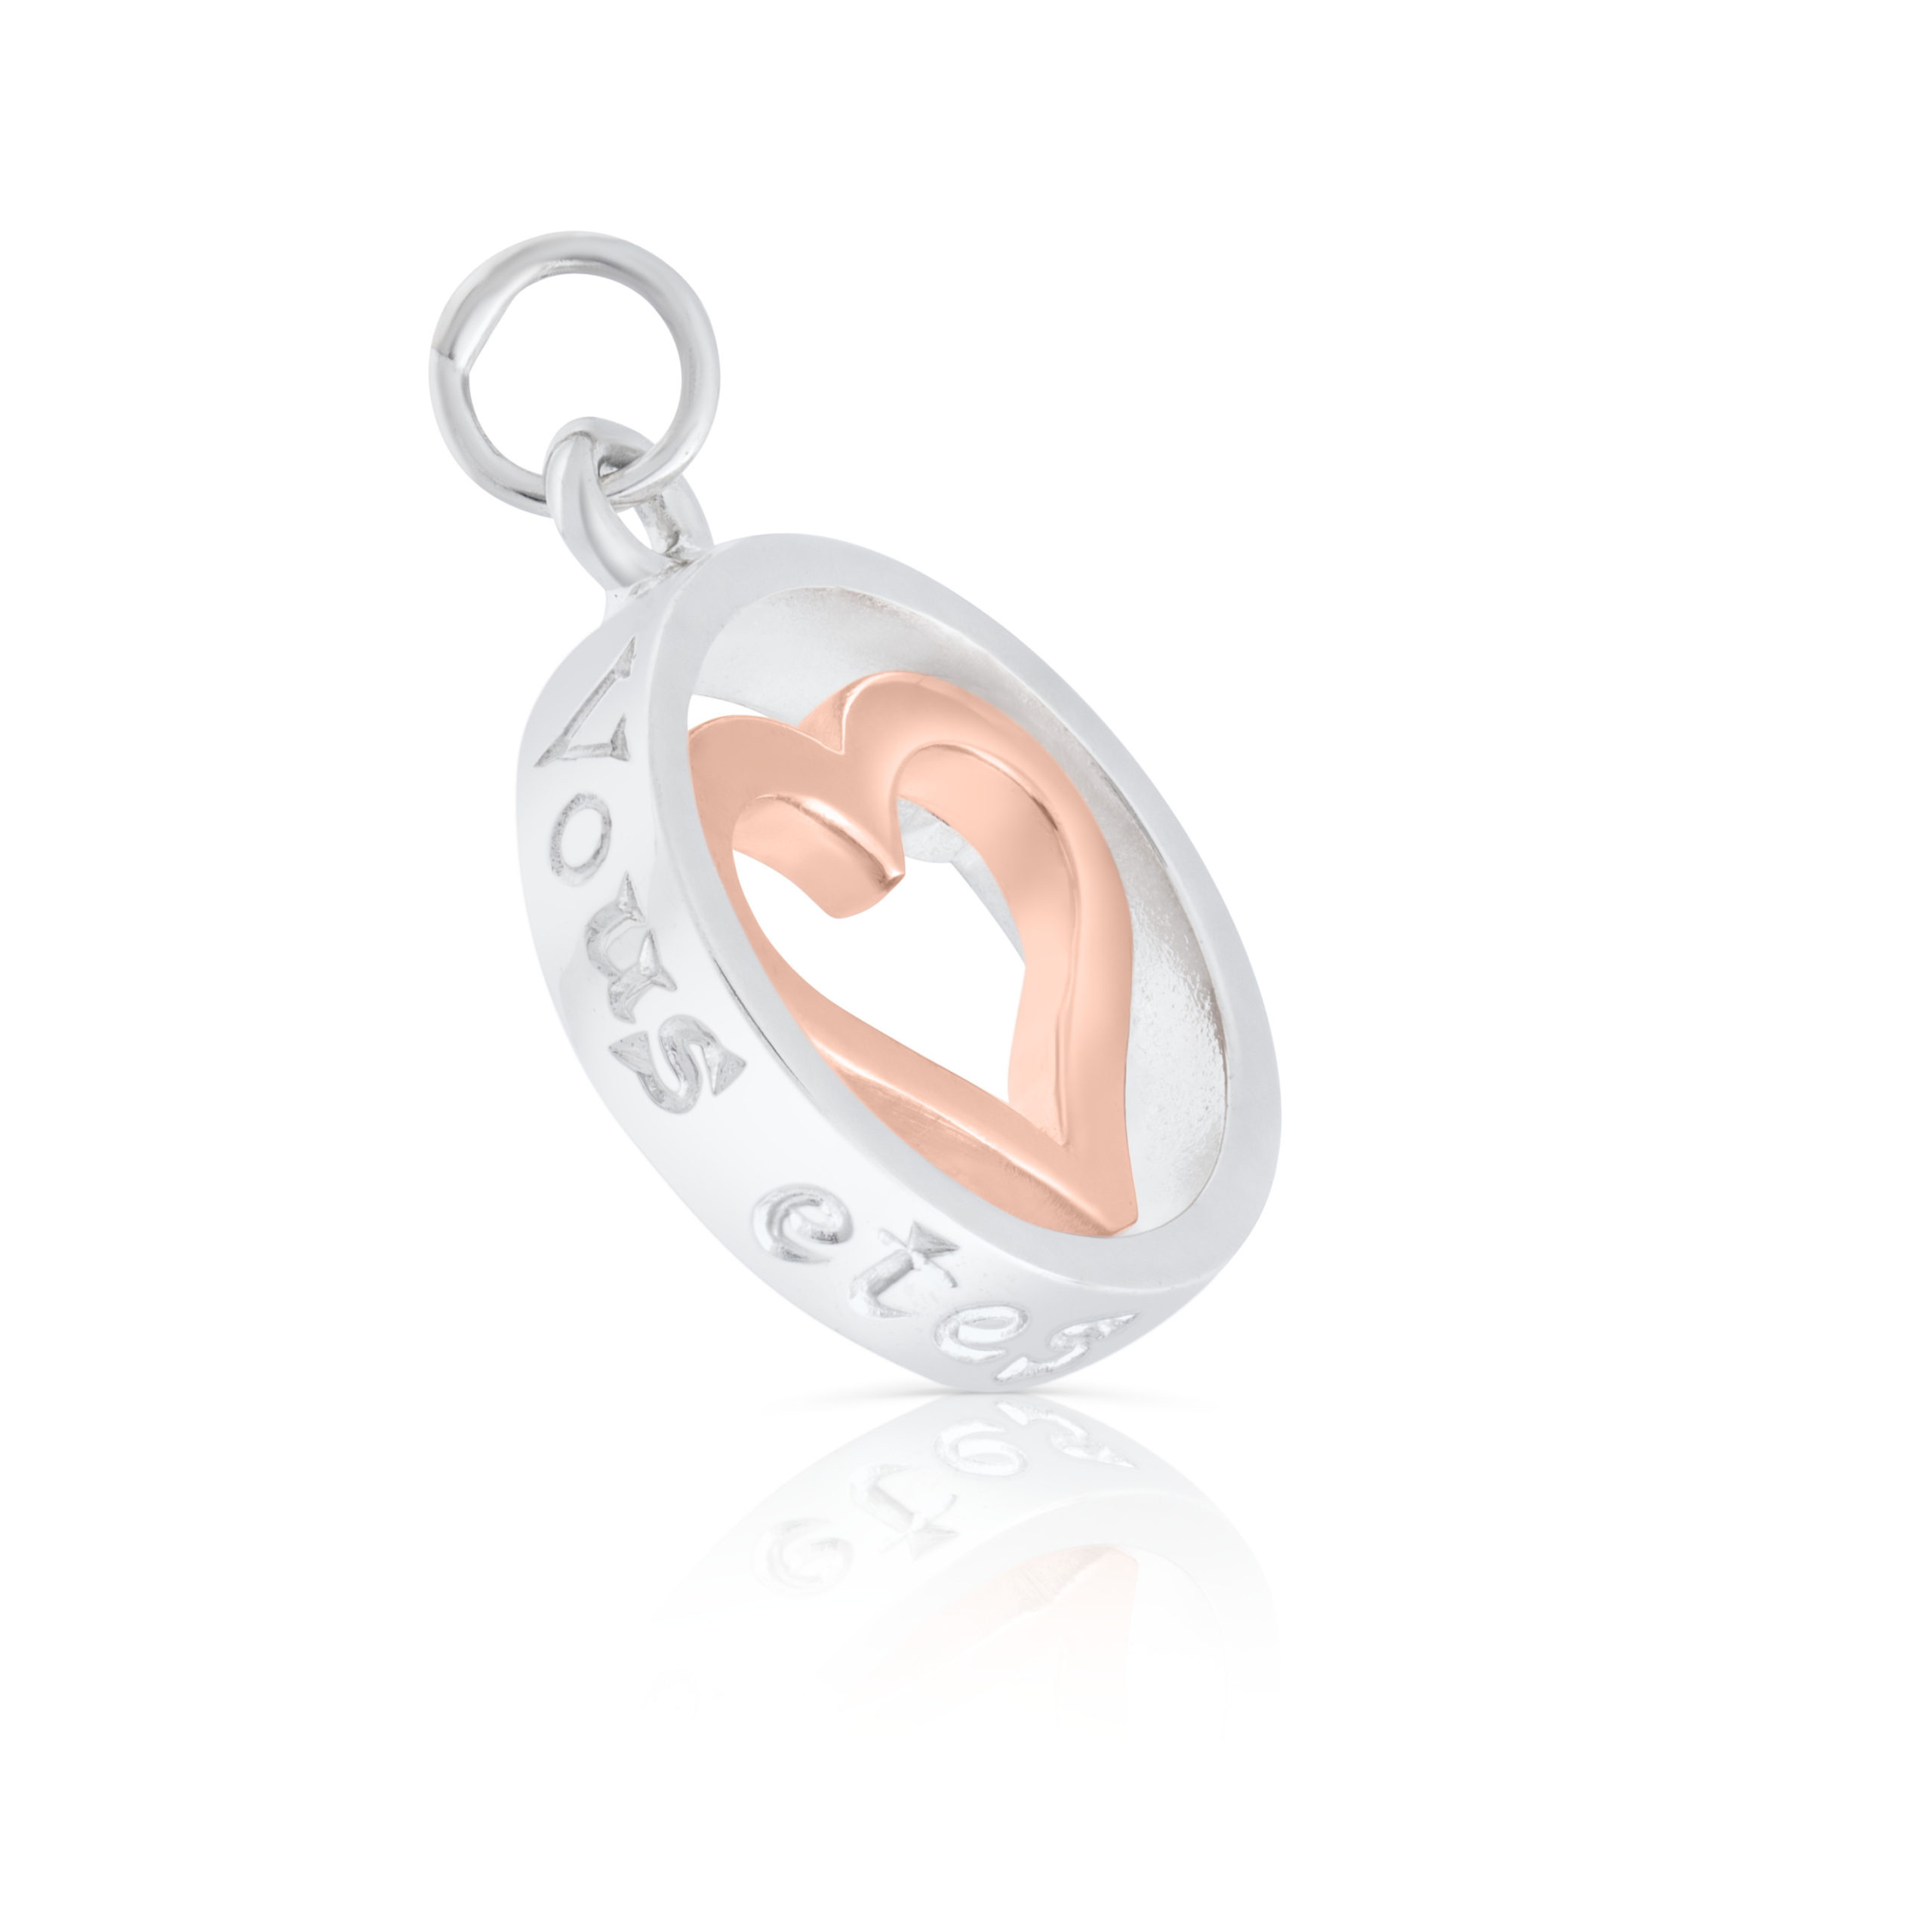 Sterling Silver & 9ct Rose Gold Heart Charm / Pendant